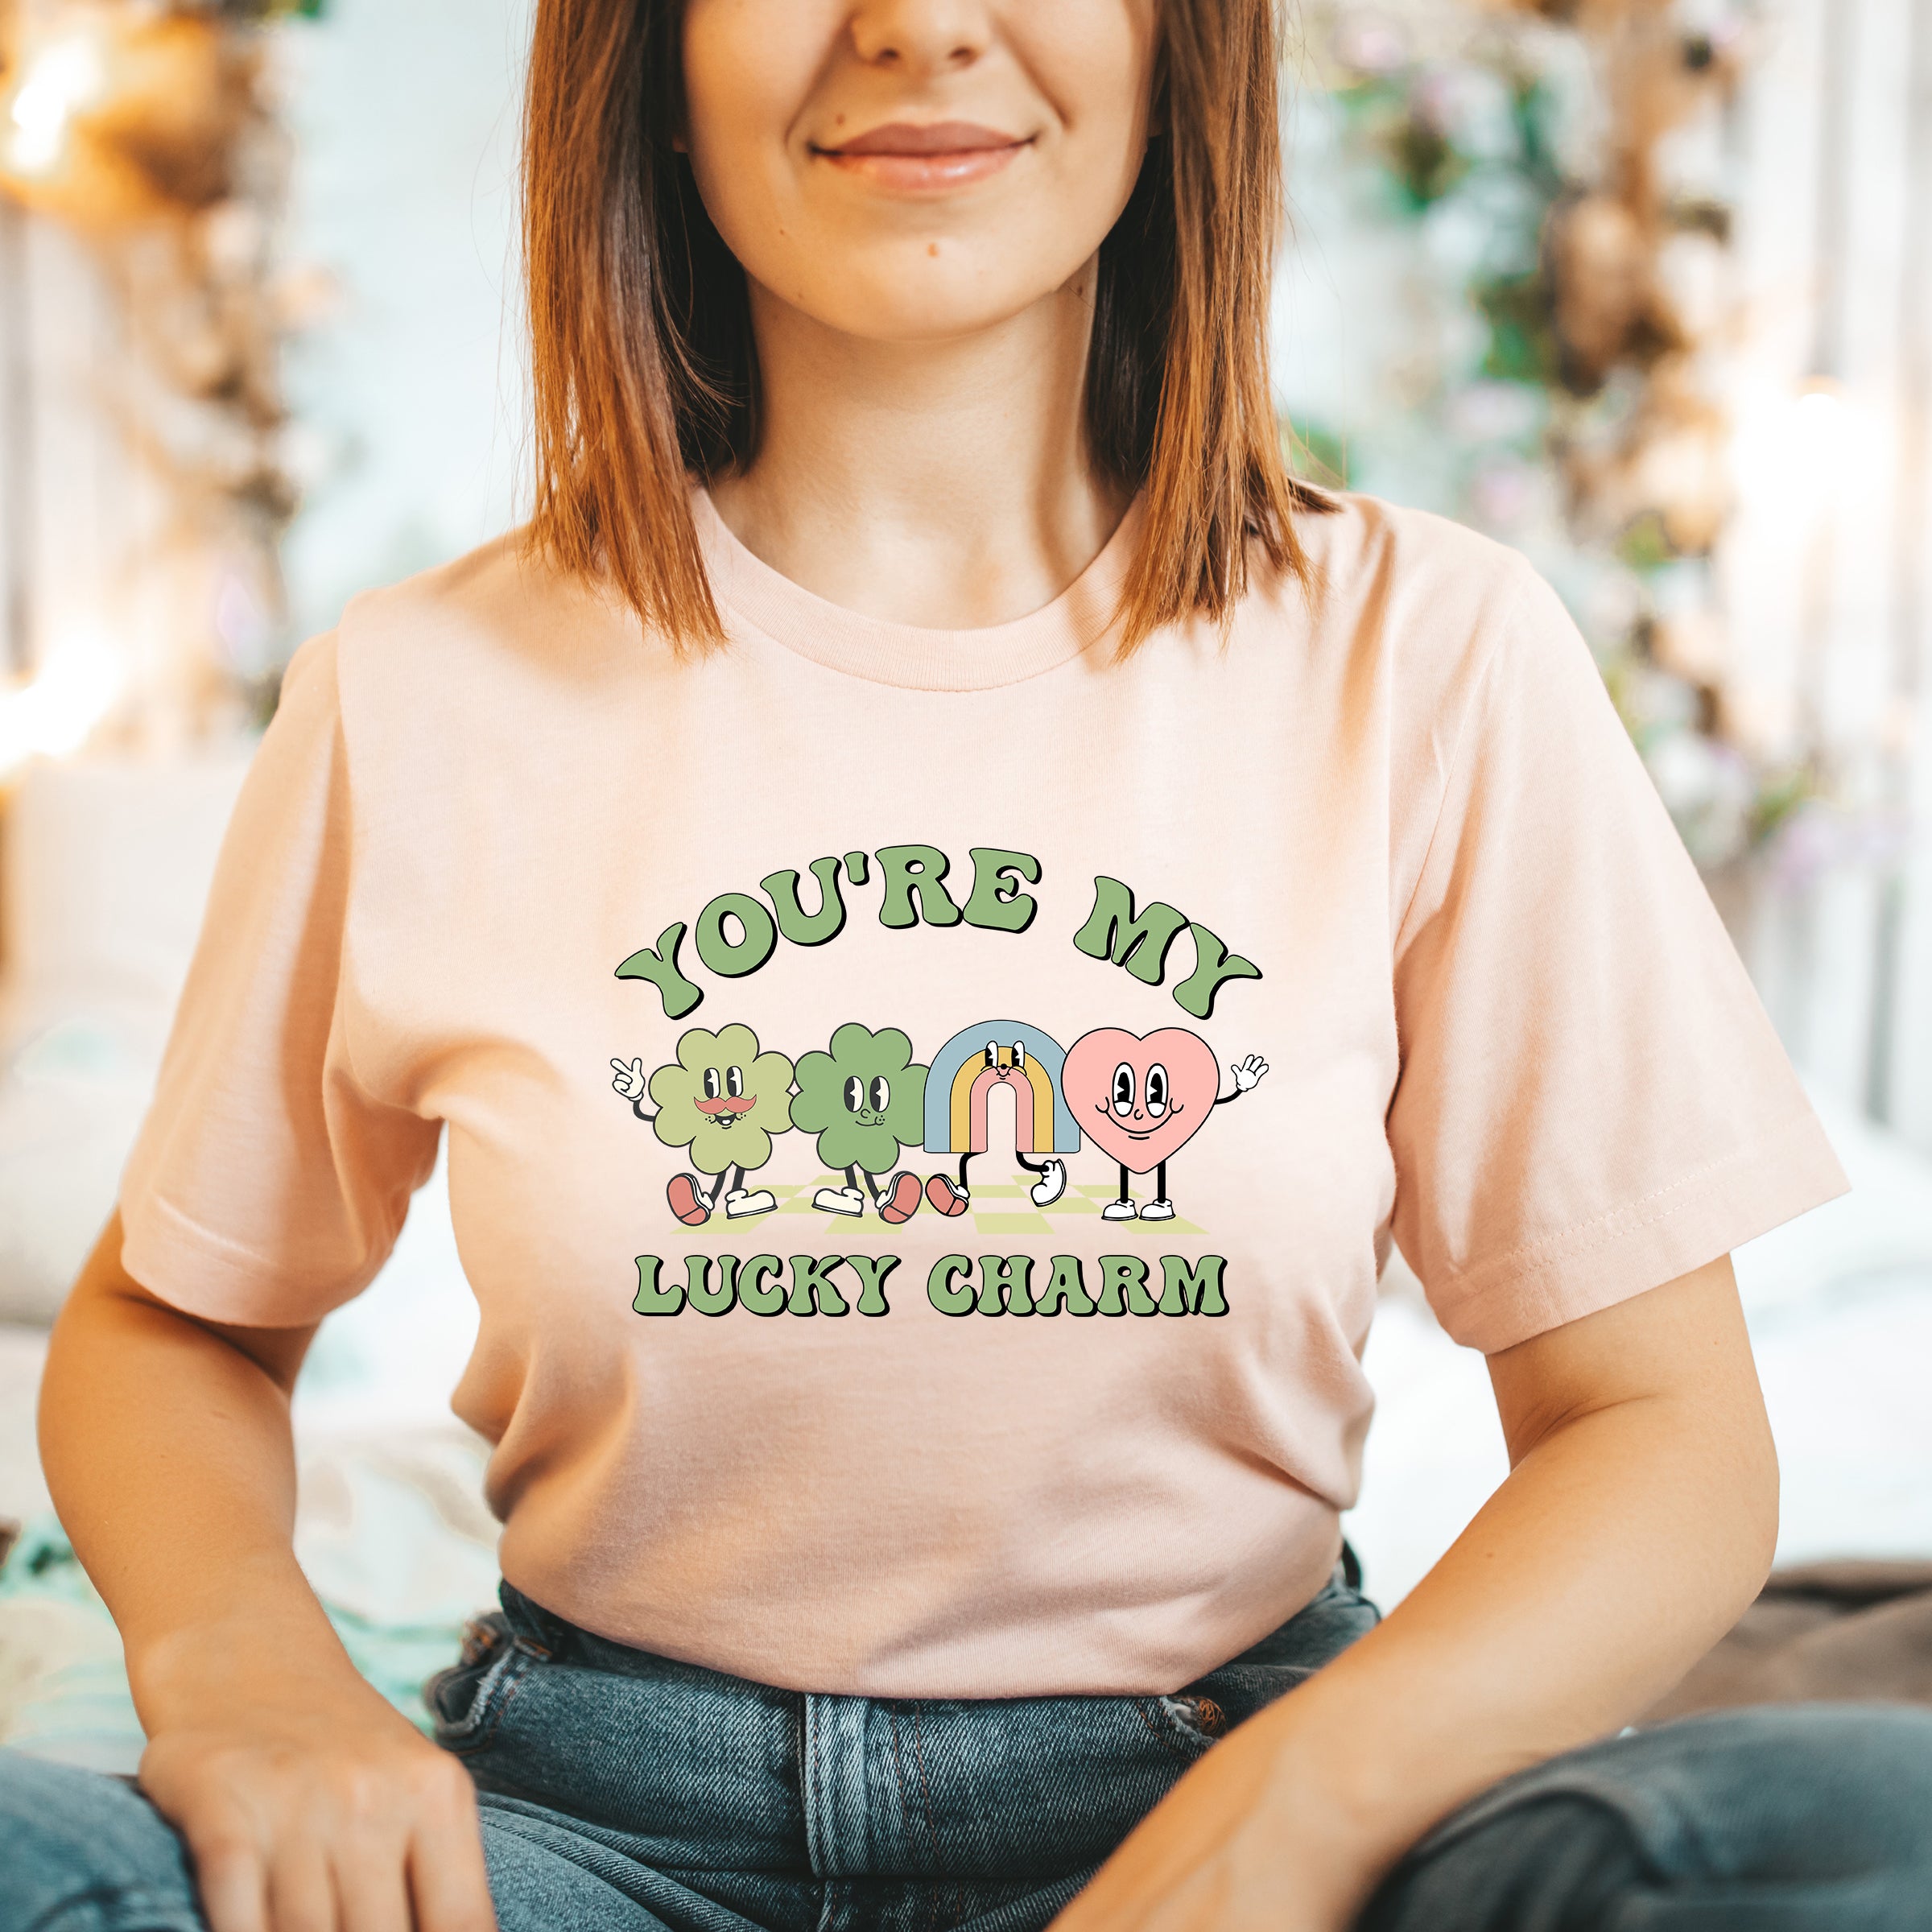 YOU'RE MY LUCKY CHARM TSHIRT